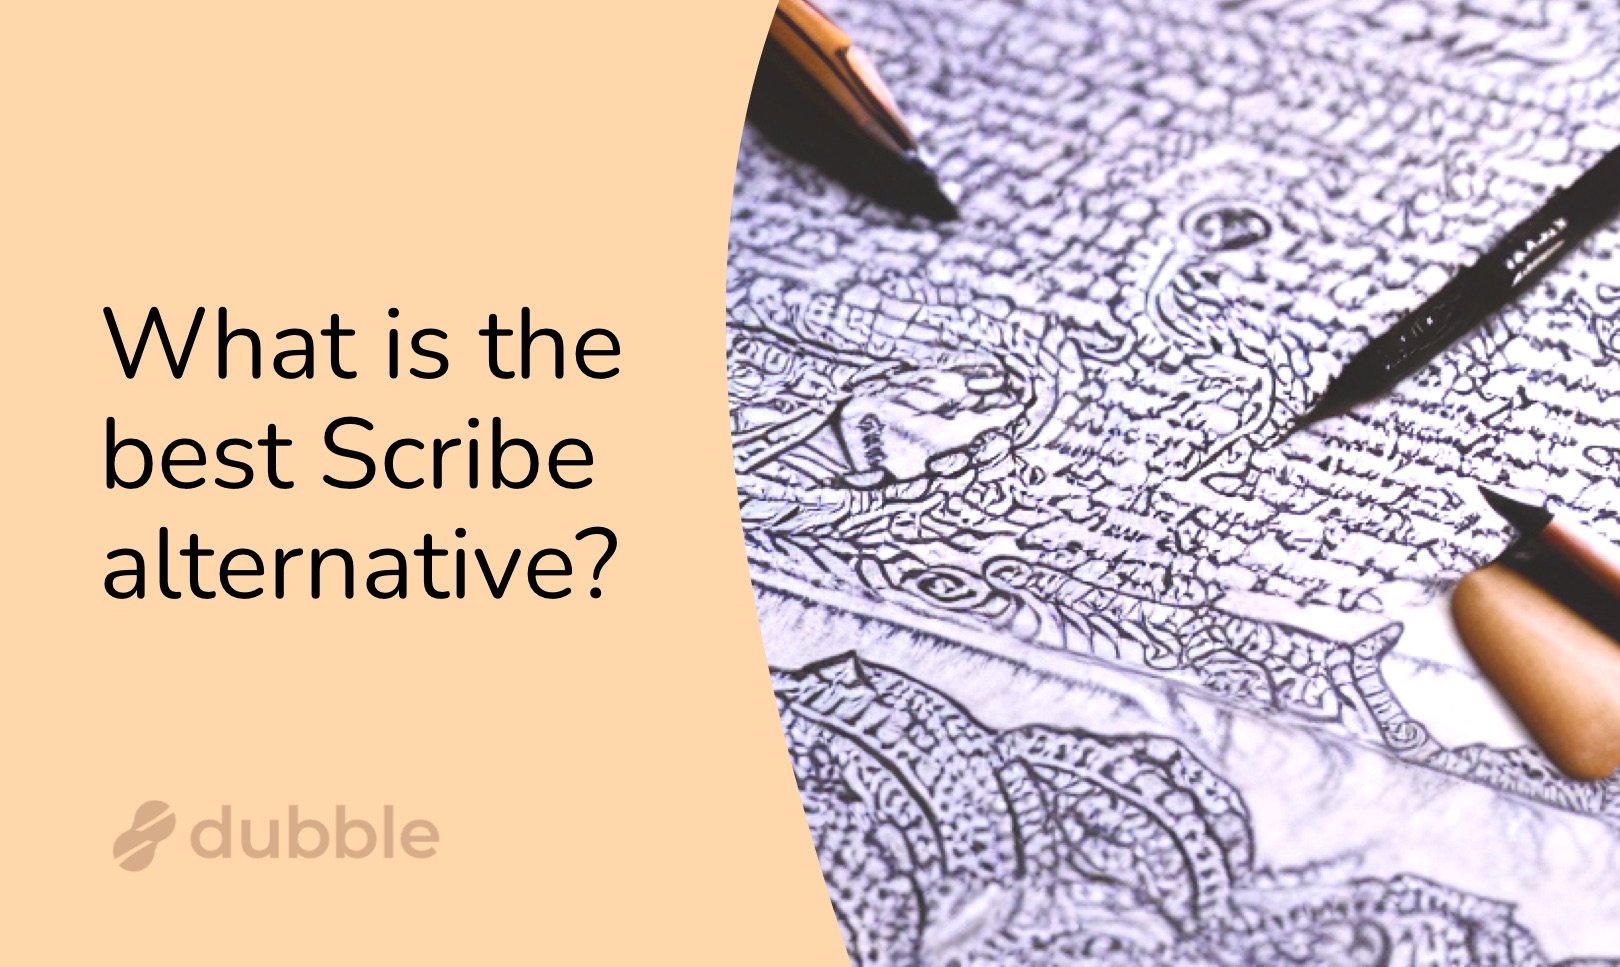 What is the best Scribe (scribehow.com) alternative?